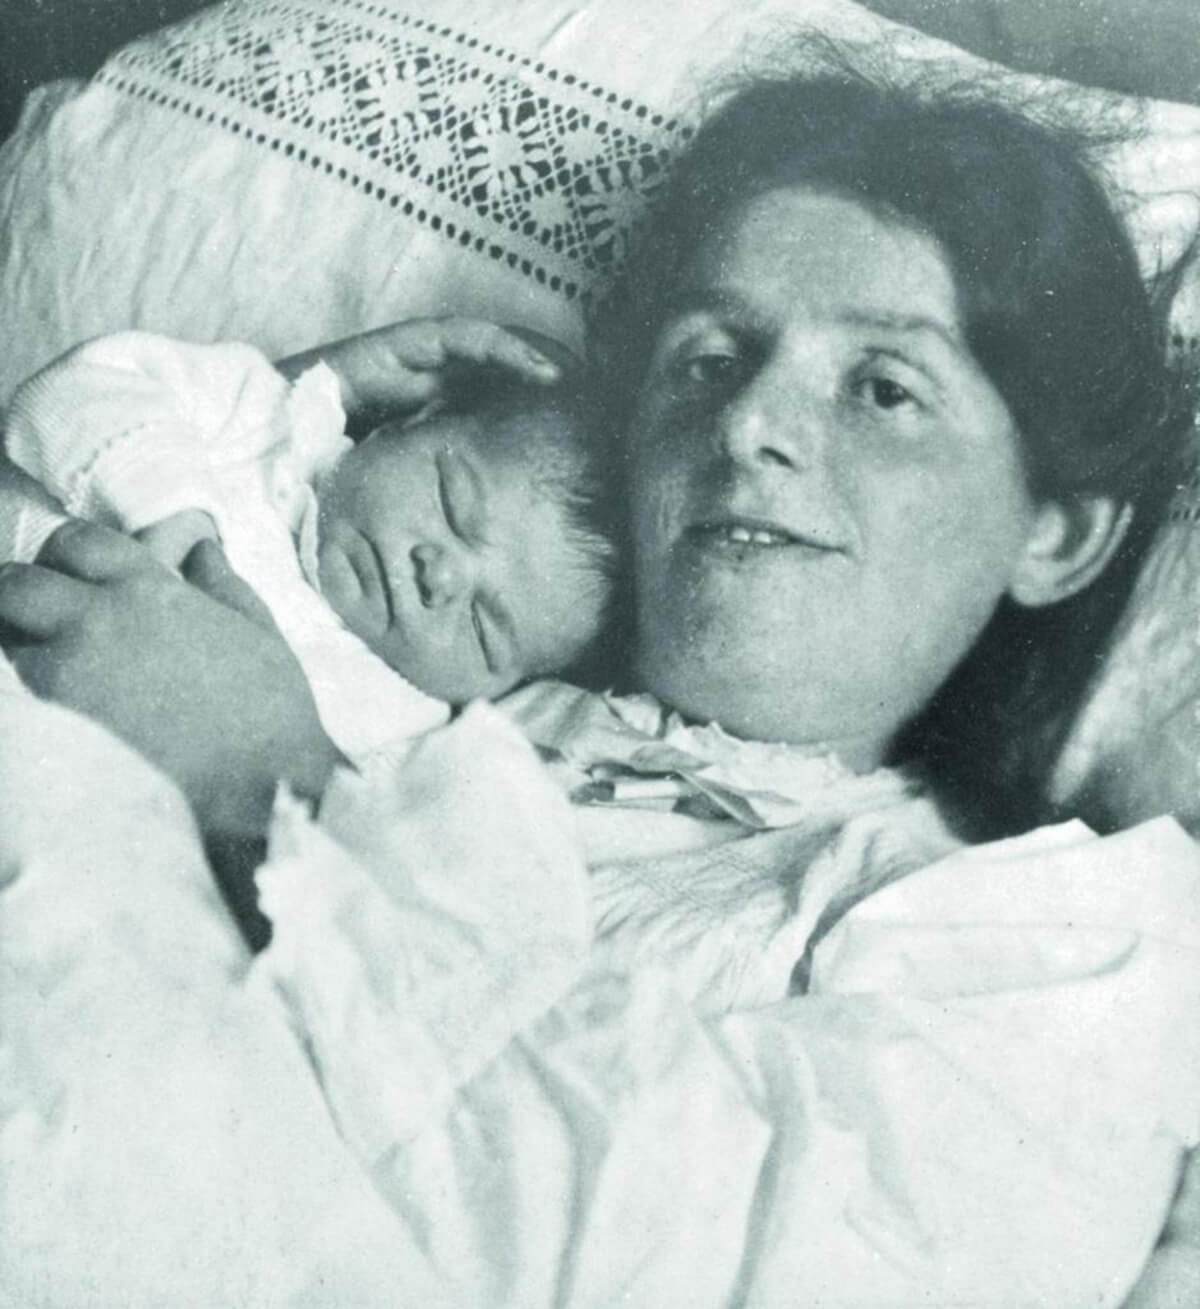 Paula Modersohn-Becker photographed with her daughter. She died 18 days after giving birth, at the age of 31. 